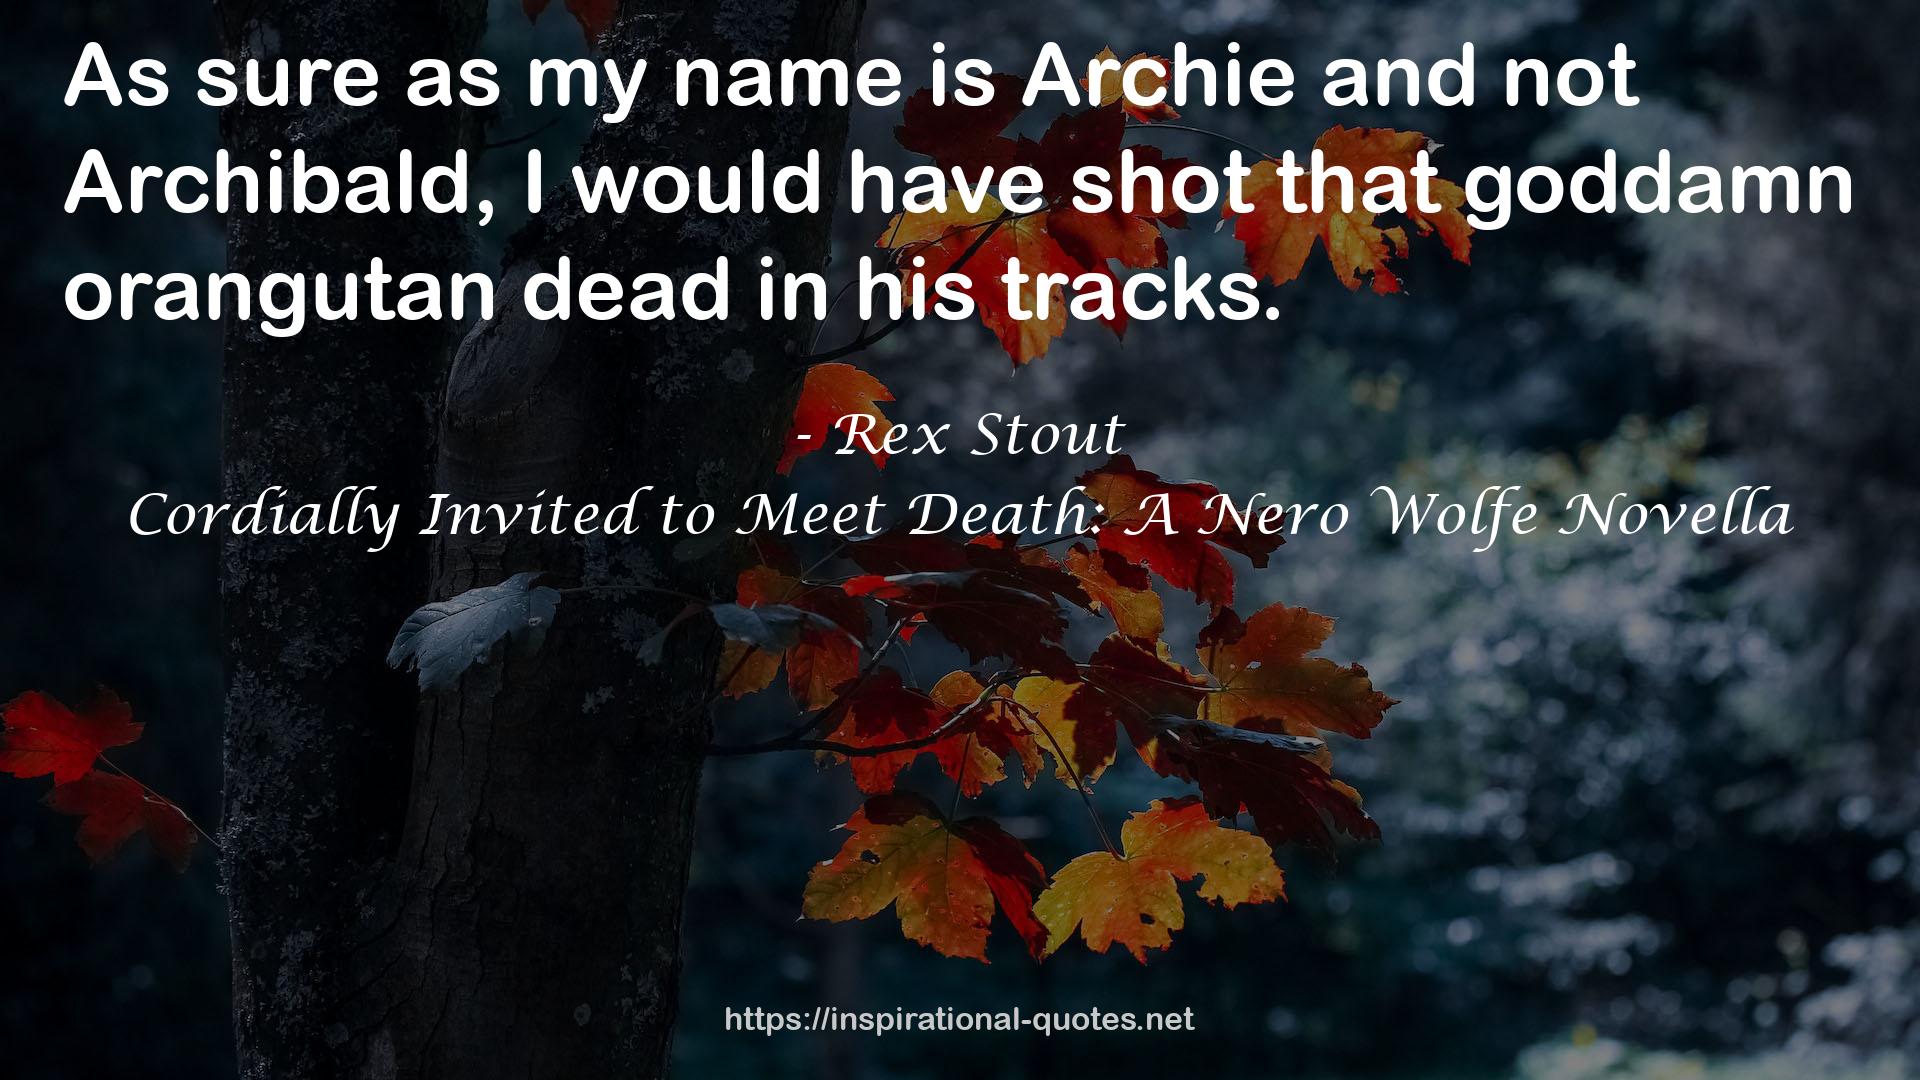 Cordially Invited to Meet Death: A Nero Wolfe Novella QUOTES